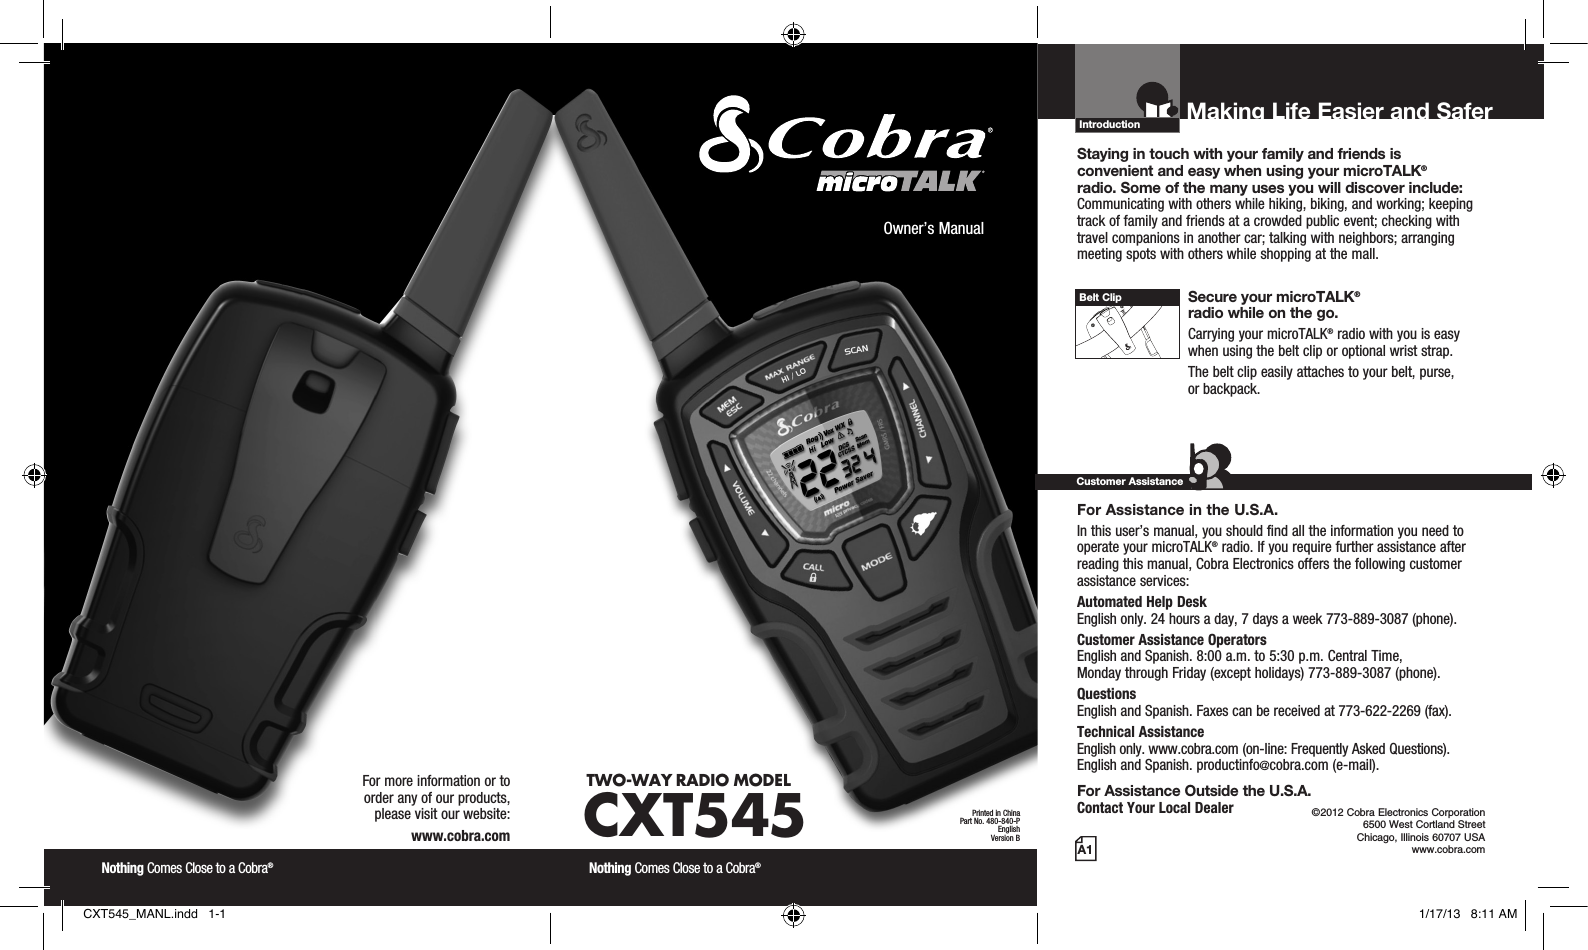 Introduction©2012 Cobra Electronics Corporation 6500 West Cortland Street Chicago, Illinois 60707 USAwww.cobra.comMaking Life Easier and Safer Staying in touch with your family and friends is  convenient and easy when using your microTALK®  radio. Some of the many uses you will discover include:Communicating with others while hiking, biking, and working; keeping track of family and friends at a crowded public event; checking with travel companions in another car; talking with neighbors; arranging meeting spots with others while shopping at the mall. Secure your microTALK®  radio while on the go.Carrying your microTALK® radio with you is easy when using the belt clip or optional wrist strap. The belt clip easily attaches to your belt, purse,  or backpack.For Assistance in the U.S.A. In this user’s manual, you should find all the information you need to operate your microTALK® radio. If you require further assistance after reading this manual, Cobra Electronics offers the following customer assistance services:Automated Help Desk  English only. 24 hours a day, 7 days a week 773-889-3087 (phone). Customer Assistance Operators  English and Spanish. 8:00 a.m. to 5:30 p.m. Central Time,  Monday through Friday (except holidays) 773-889-3087 (phone). Questions  English and Spanish. Faxes can be received at 773-622-2269 (fax). Technical Assistance  English only. www.cobra.com (on-line: Frequently Asked Questions).  English and Spanish. productinfo@cobra.com (e-mail).For Assistance Outside the U.S.A. Contact Your Local DealerCustomer AssistanceA1Owner’s ManualNothing Comes Close to a Cobra® Nothing Comes Close to a Cobra® For more information or to  order any of our products,  please visit our website:www.cobra.comBelt ClipPrinted in ChinaPart No. 480-840-PEnglishVersion BTWO-WAY RADIO  MODEL CXT545CXT545_MANL.indd   1-1 1/17/13   8:11 AM